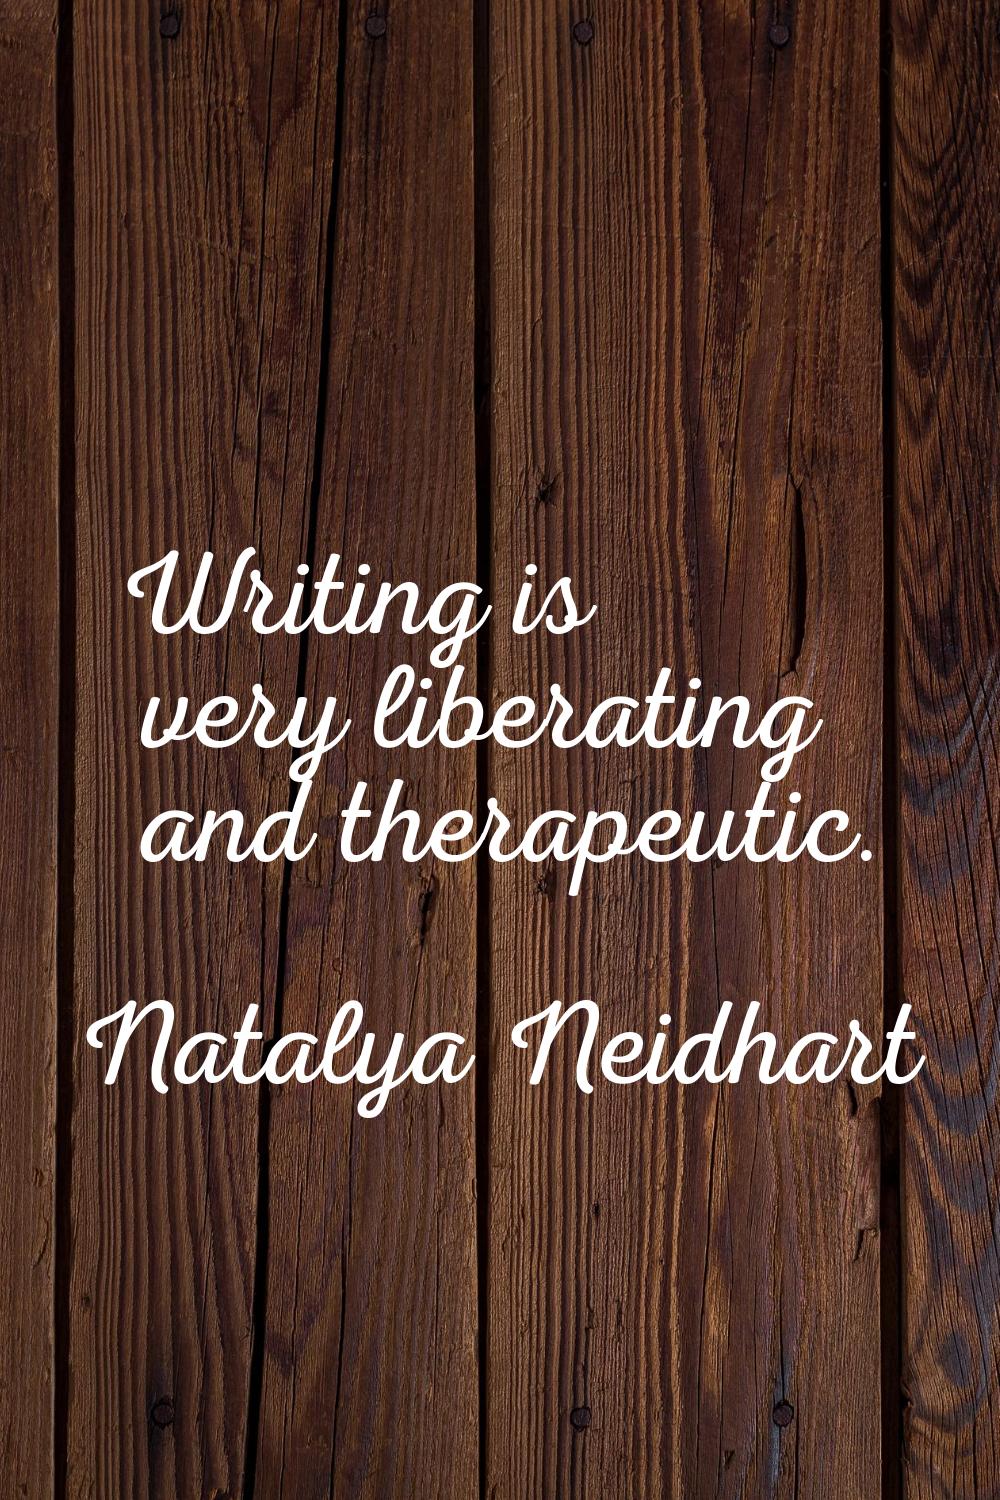 Writing is very liberating and therapeutic.